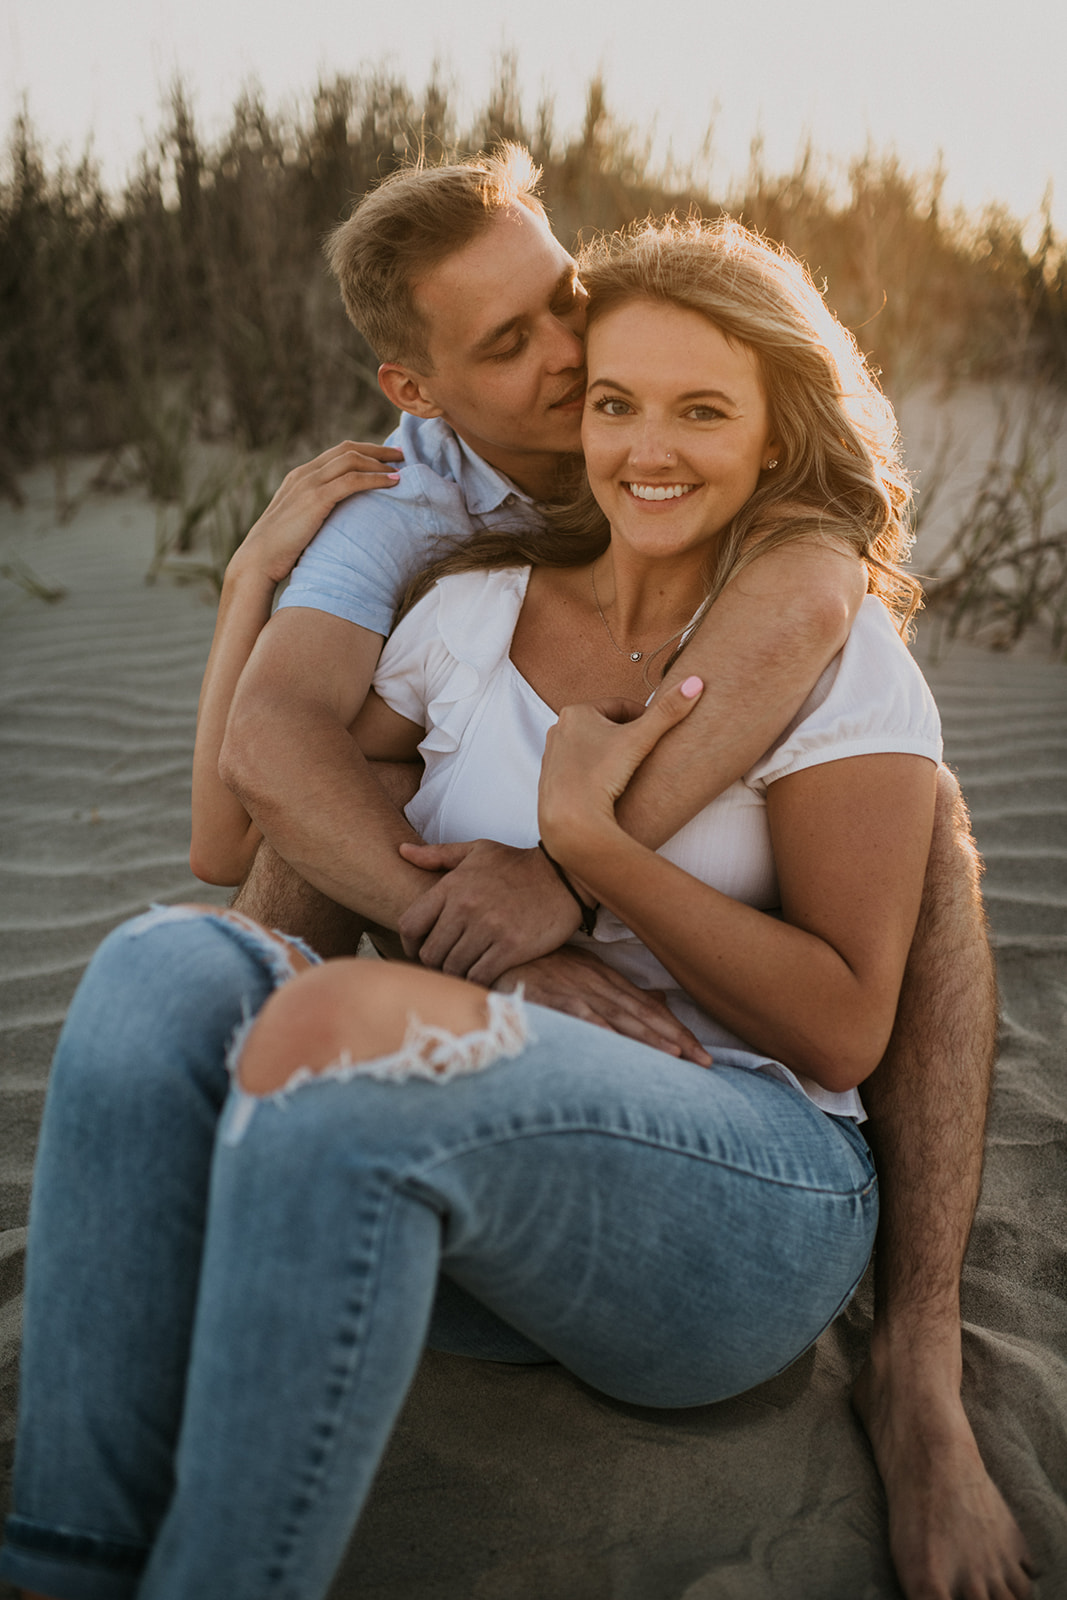 Couples engagement on Folly Beach in SC captured by Kim Kaye - Charleston engagement photographer